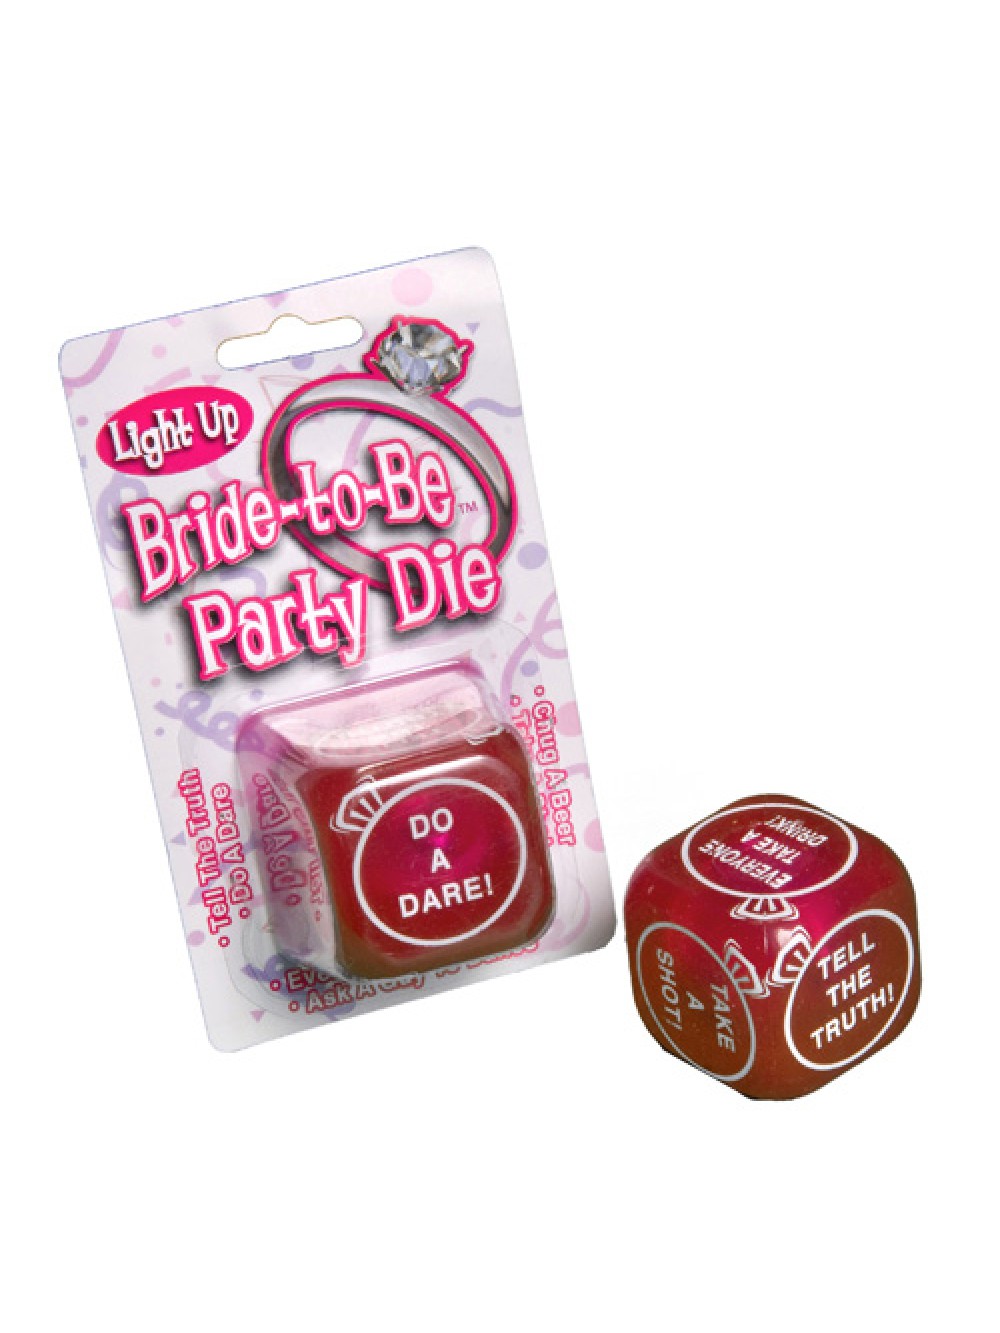 Flashing Bride To Be Party Dice 176554005652